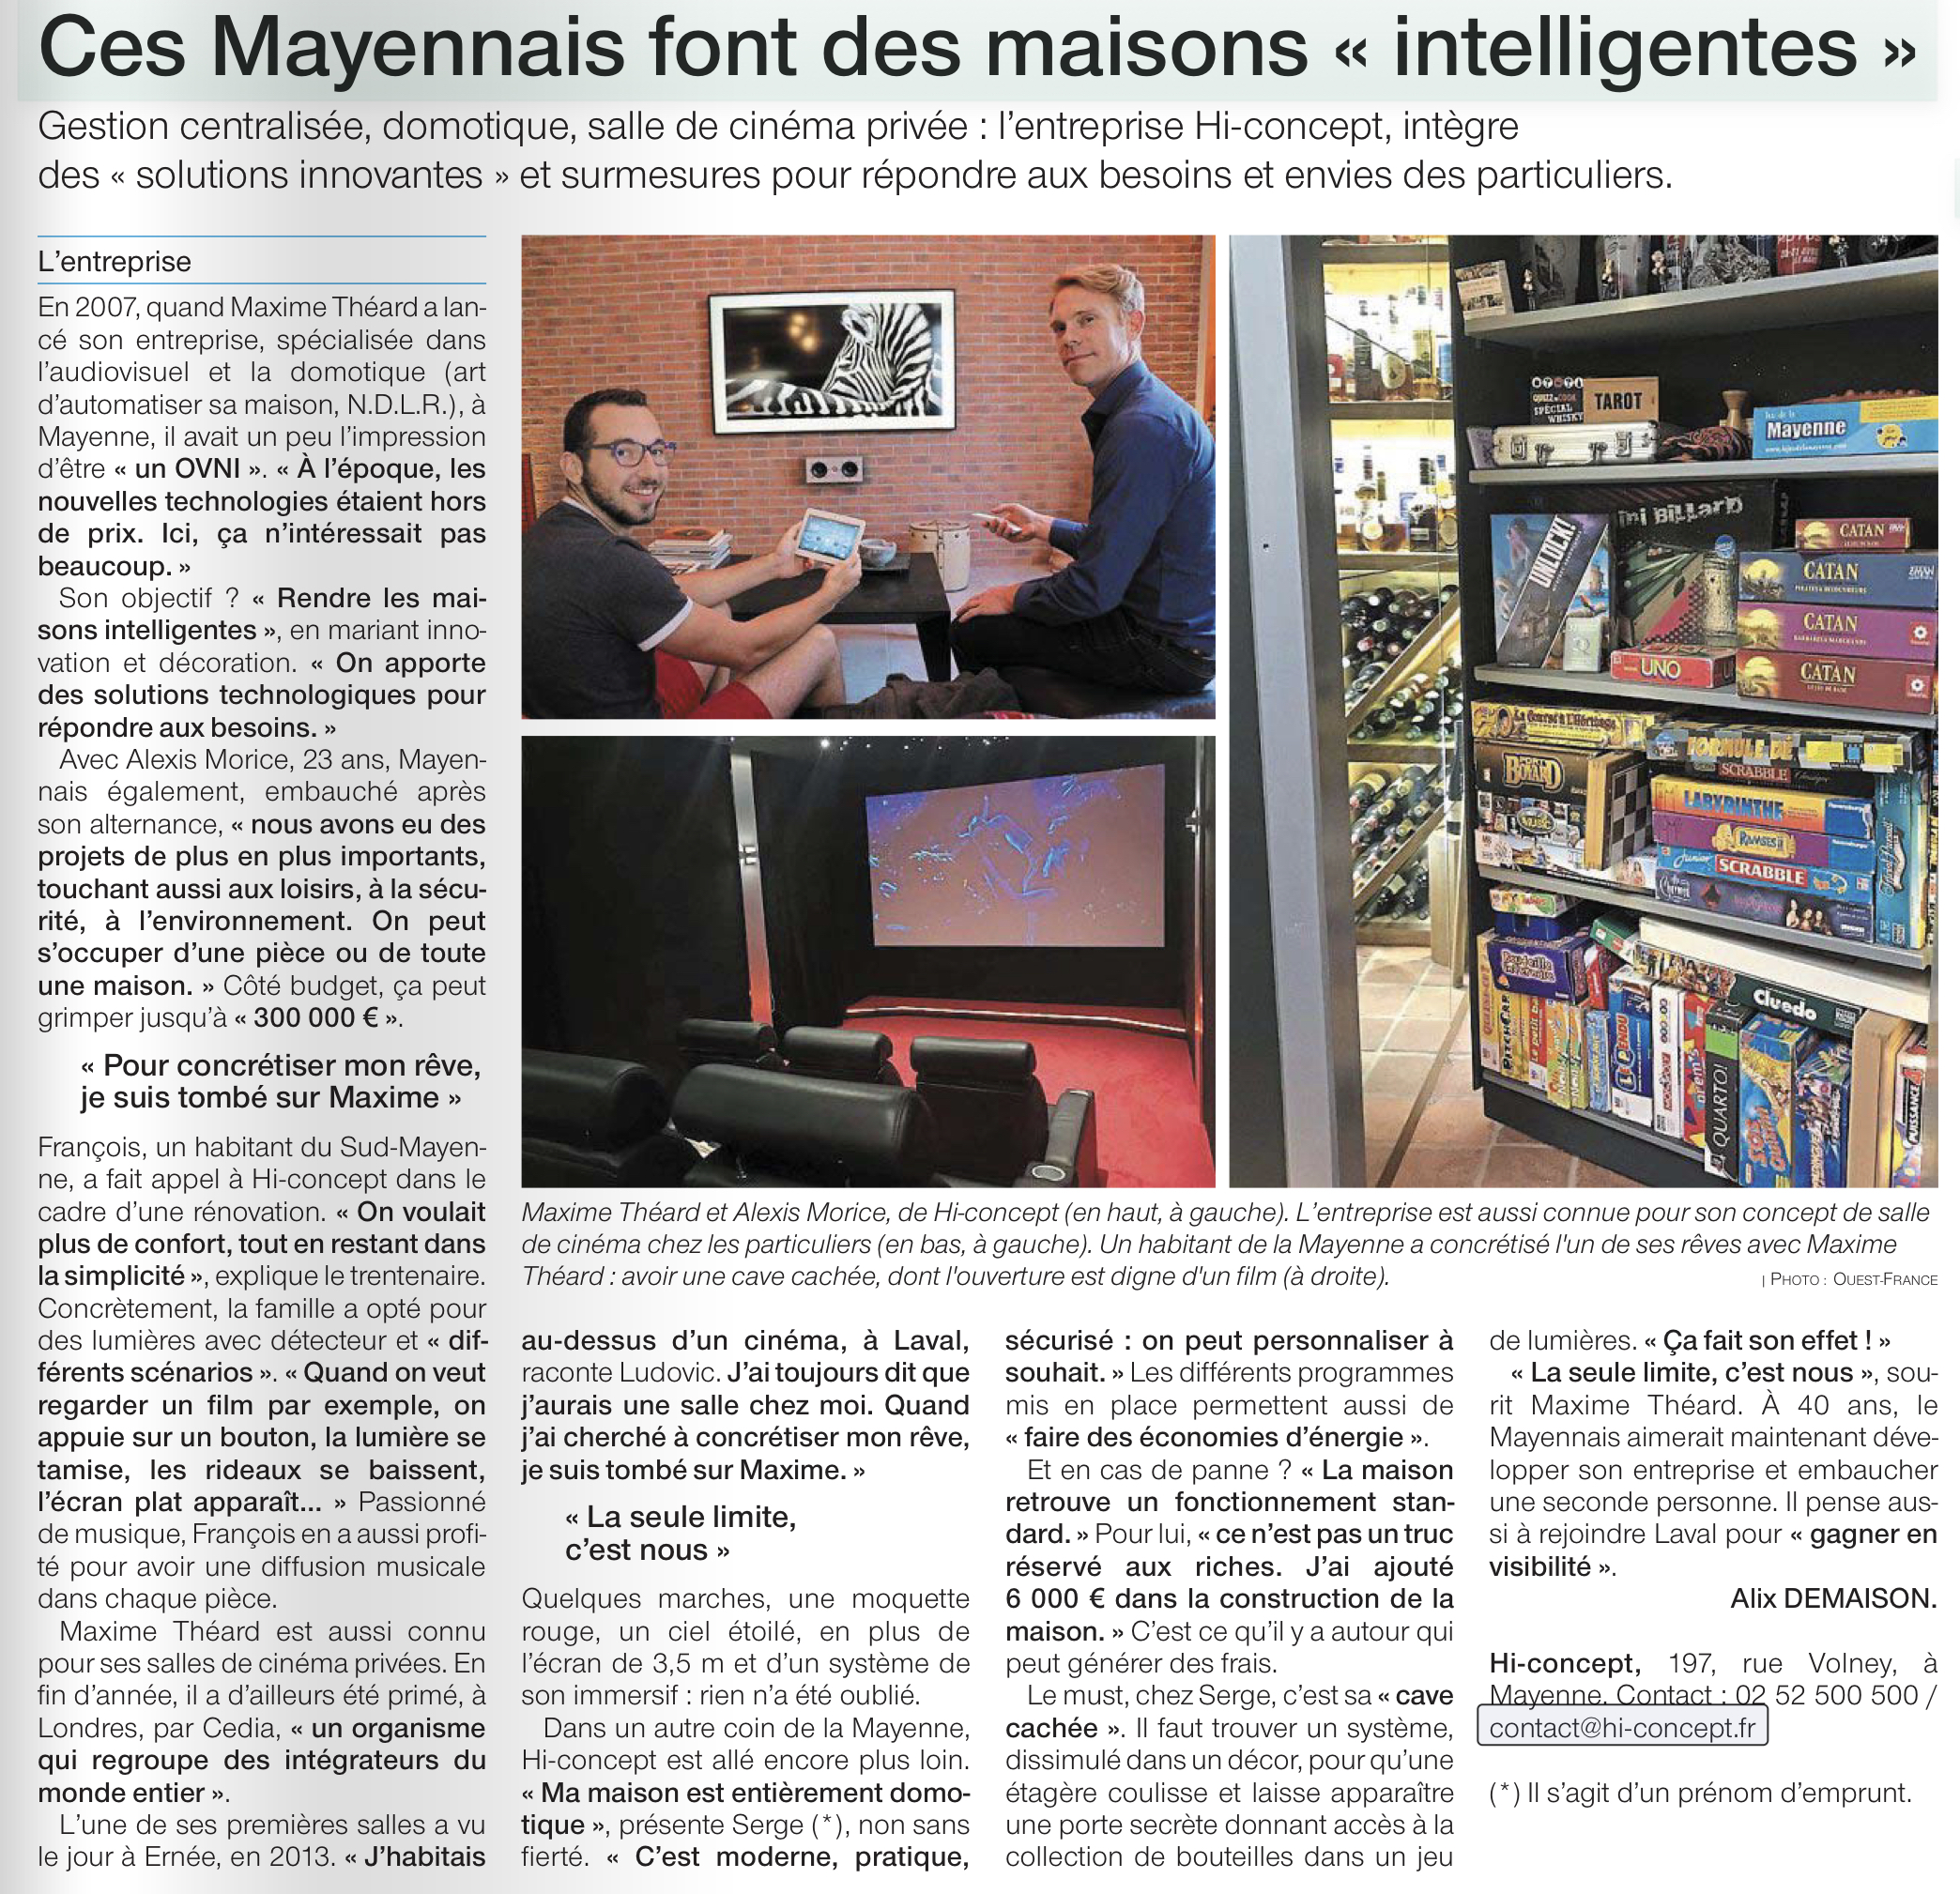 Ouest France News Article feature on Hi-Concept's activities and projects